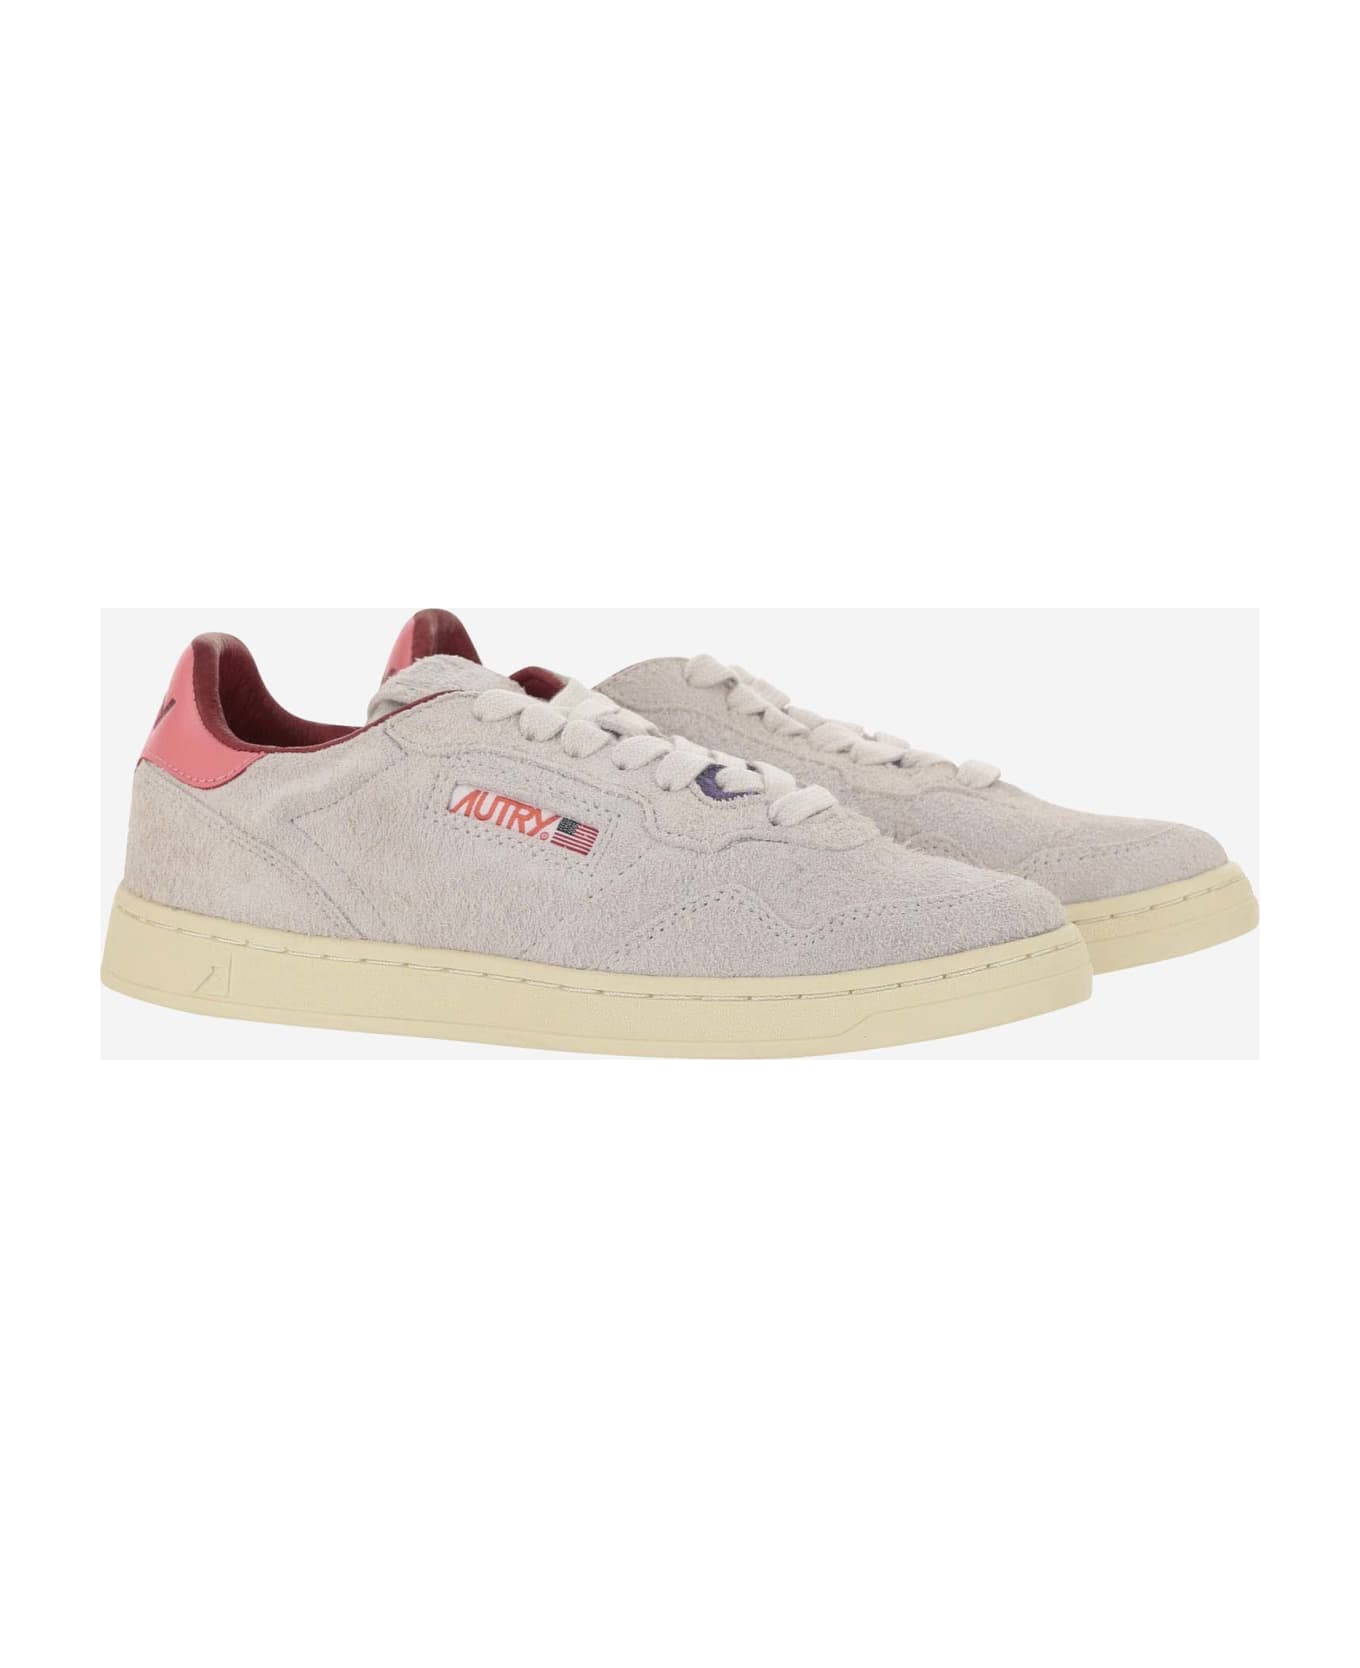 Autry Medalist Low Sneakers In Suede Hair Sand Effect - White